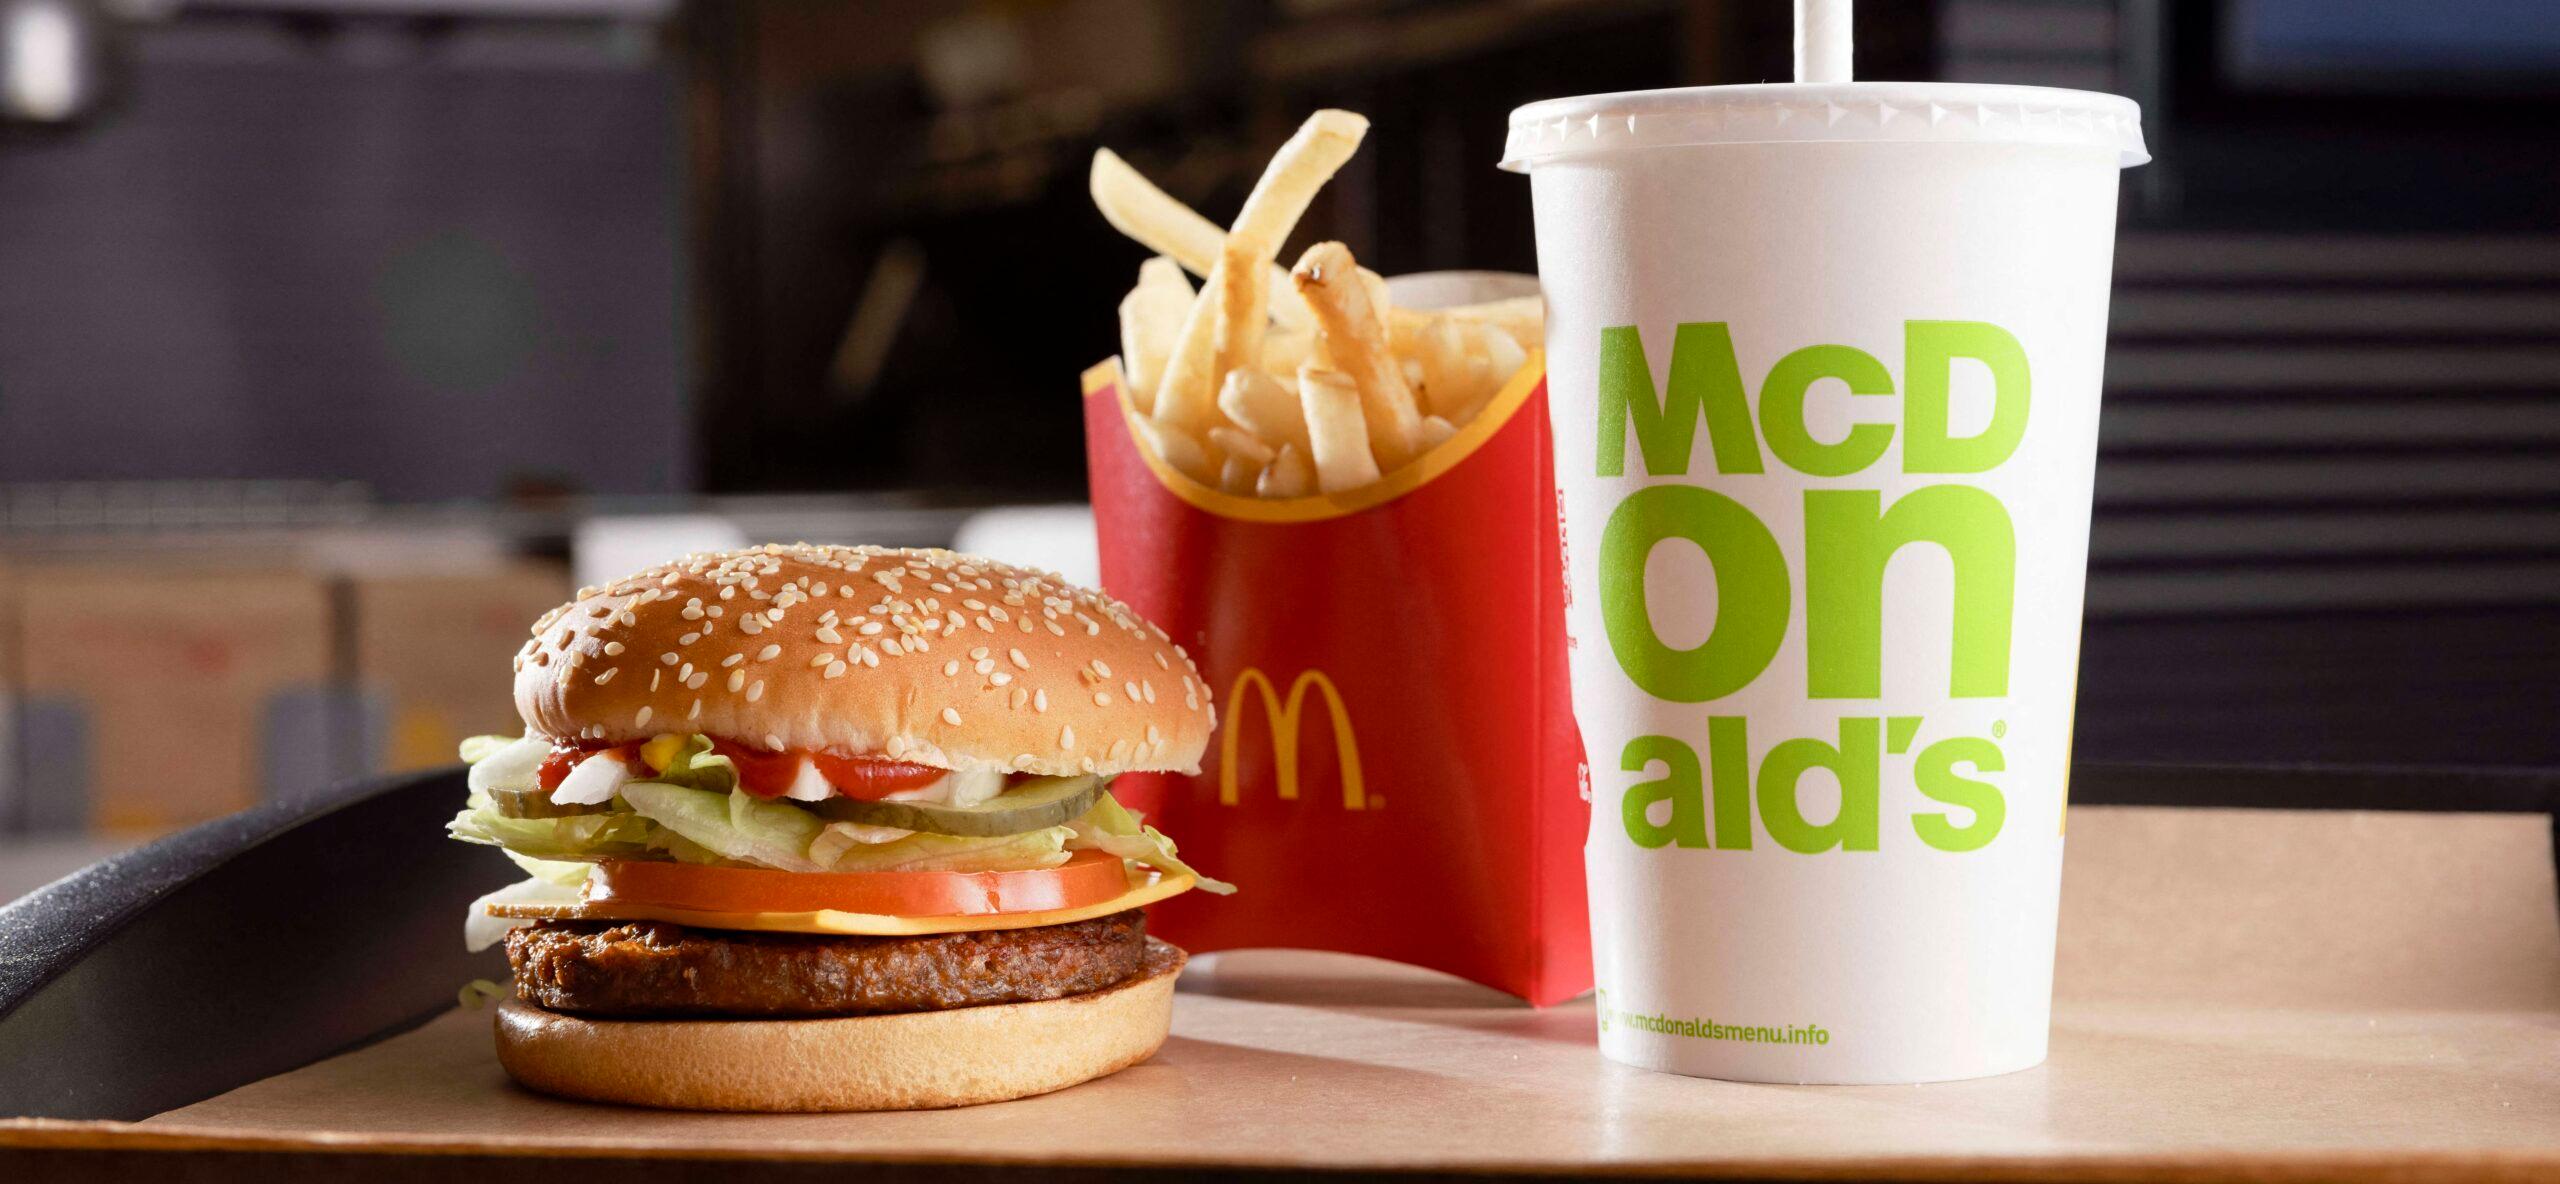 McDonald’s Takes Economical Hit, Considering New Deal To Win Back Customers